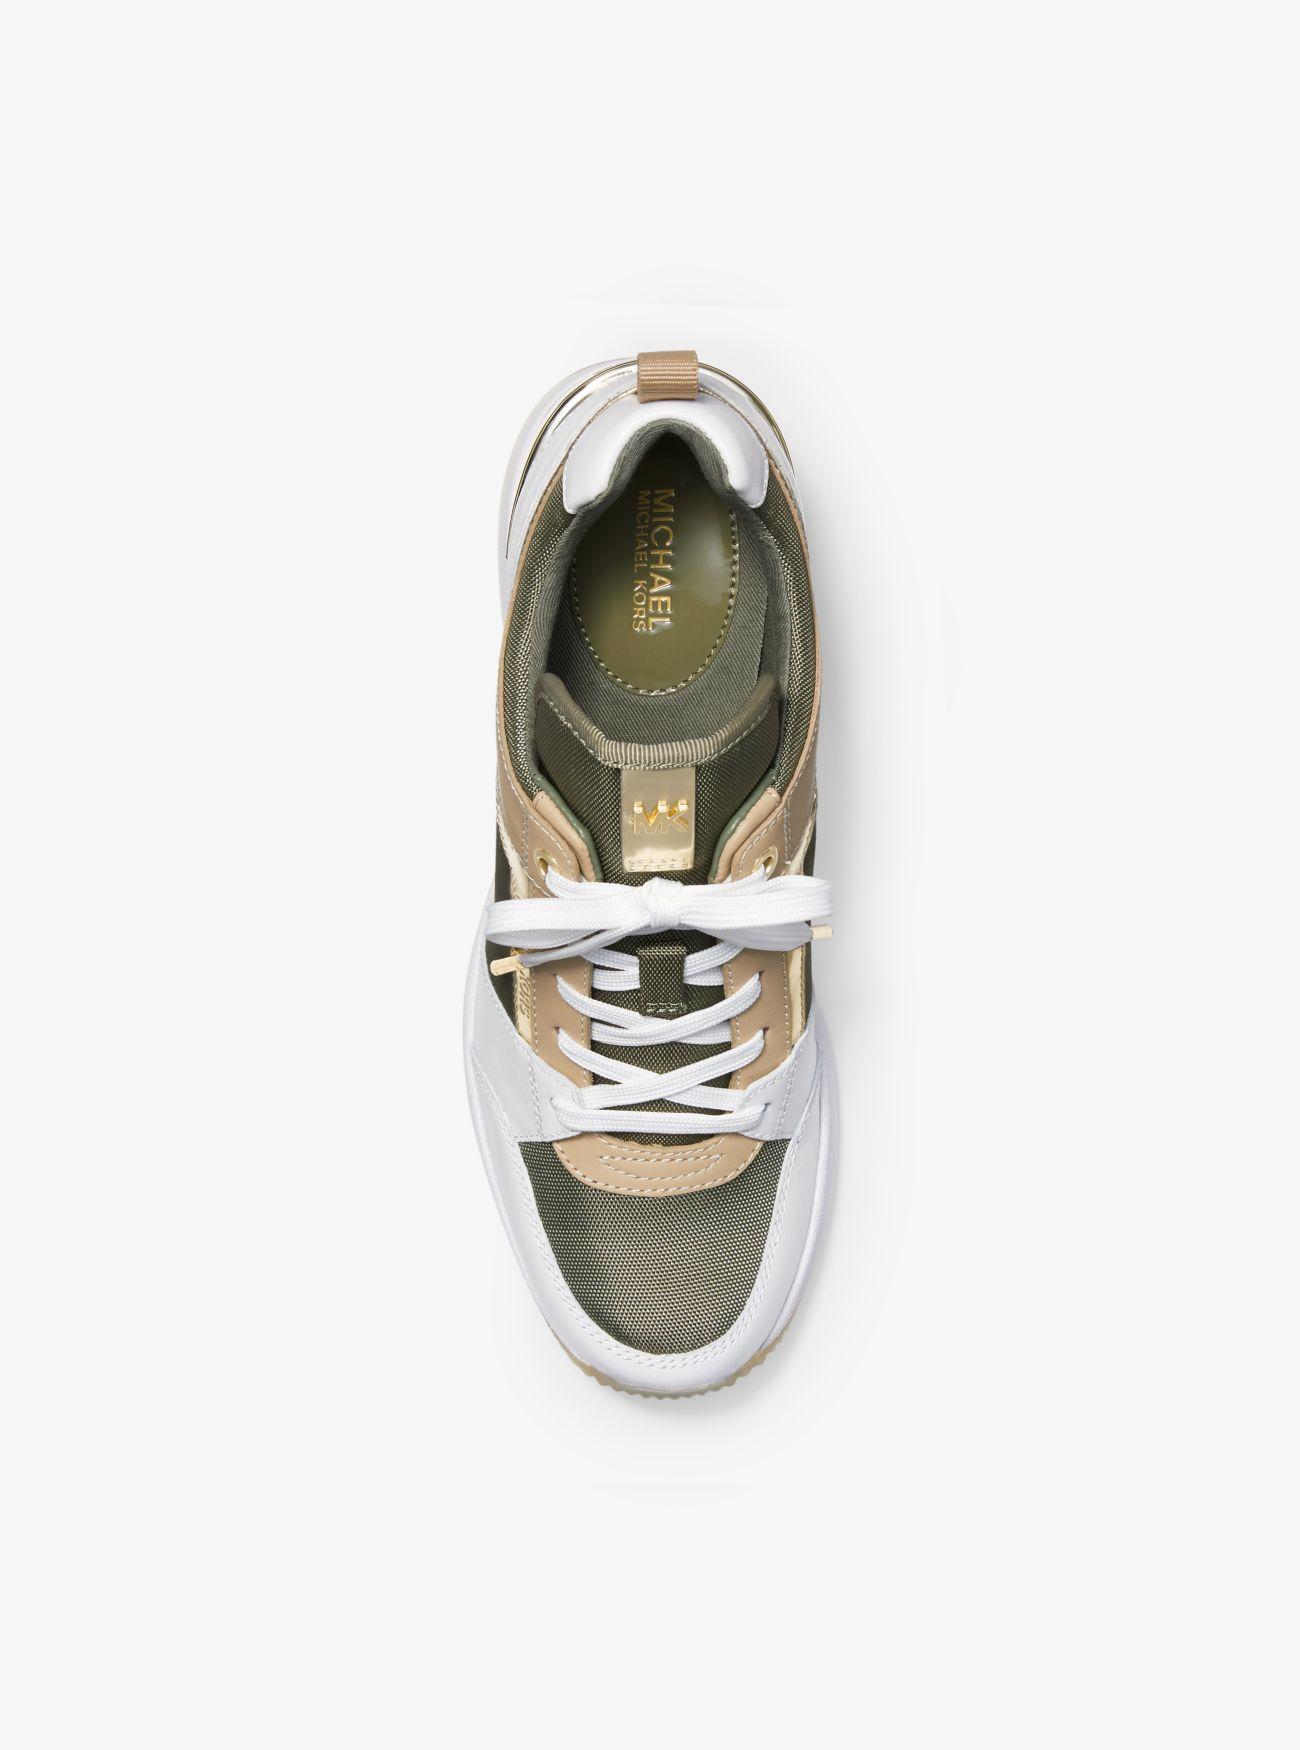 Michael Kors Georgie Canvas And Leather Trainer in Green | Lyst